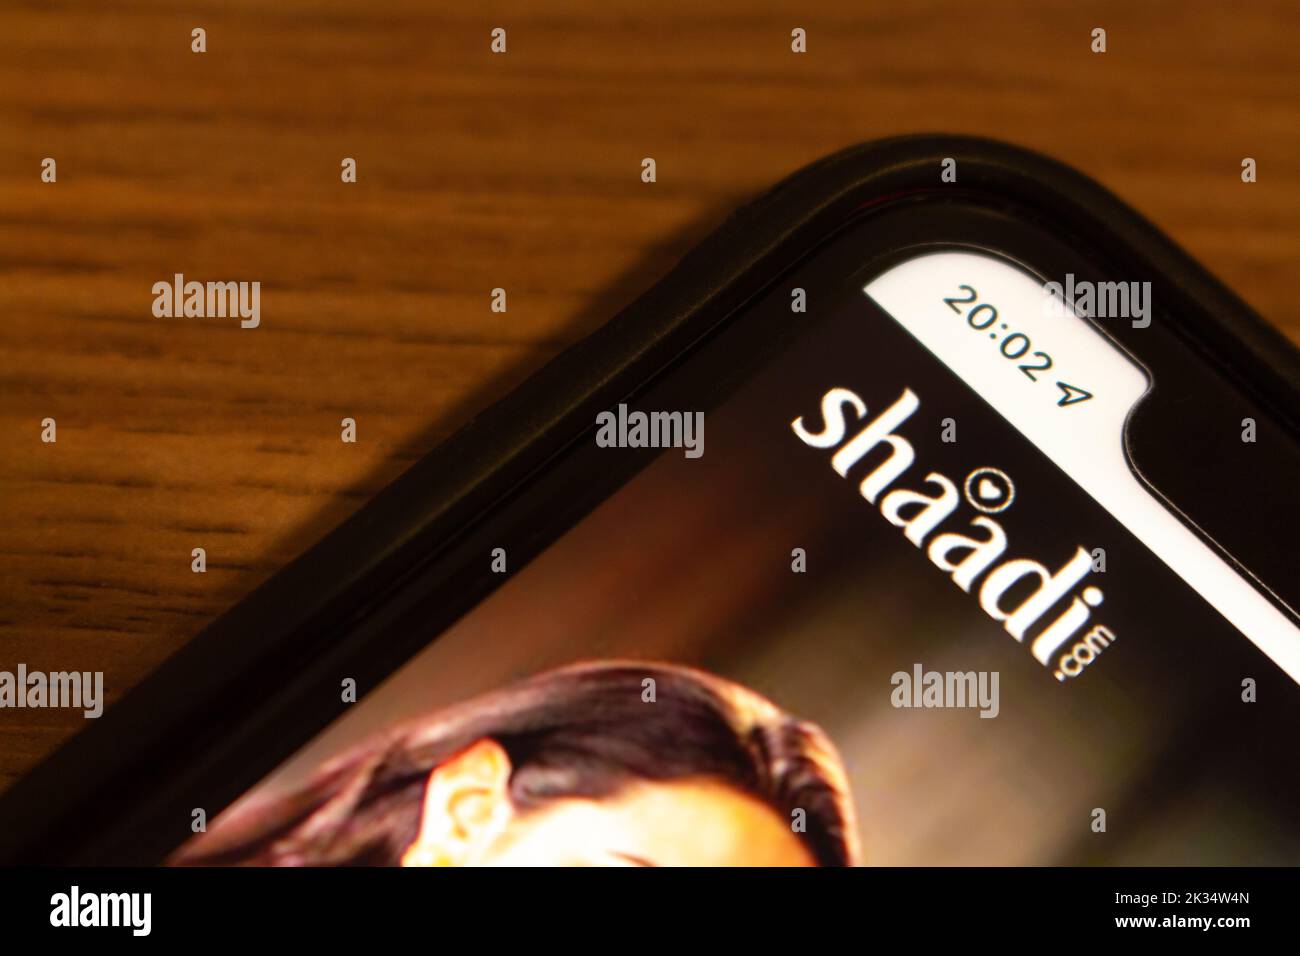 Logo of Shaadi on its website on an iPhone. Shaadi.com is an Indian online wedding service. Its core market is India, Pakistan, and Bangladesh Stock Photo